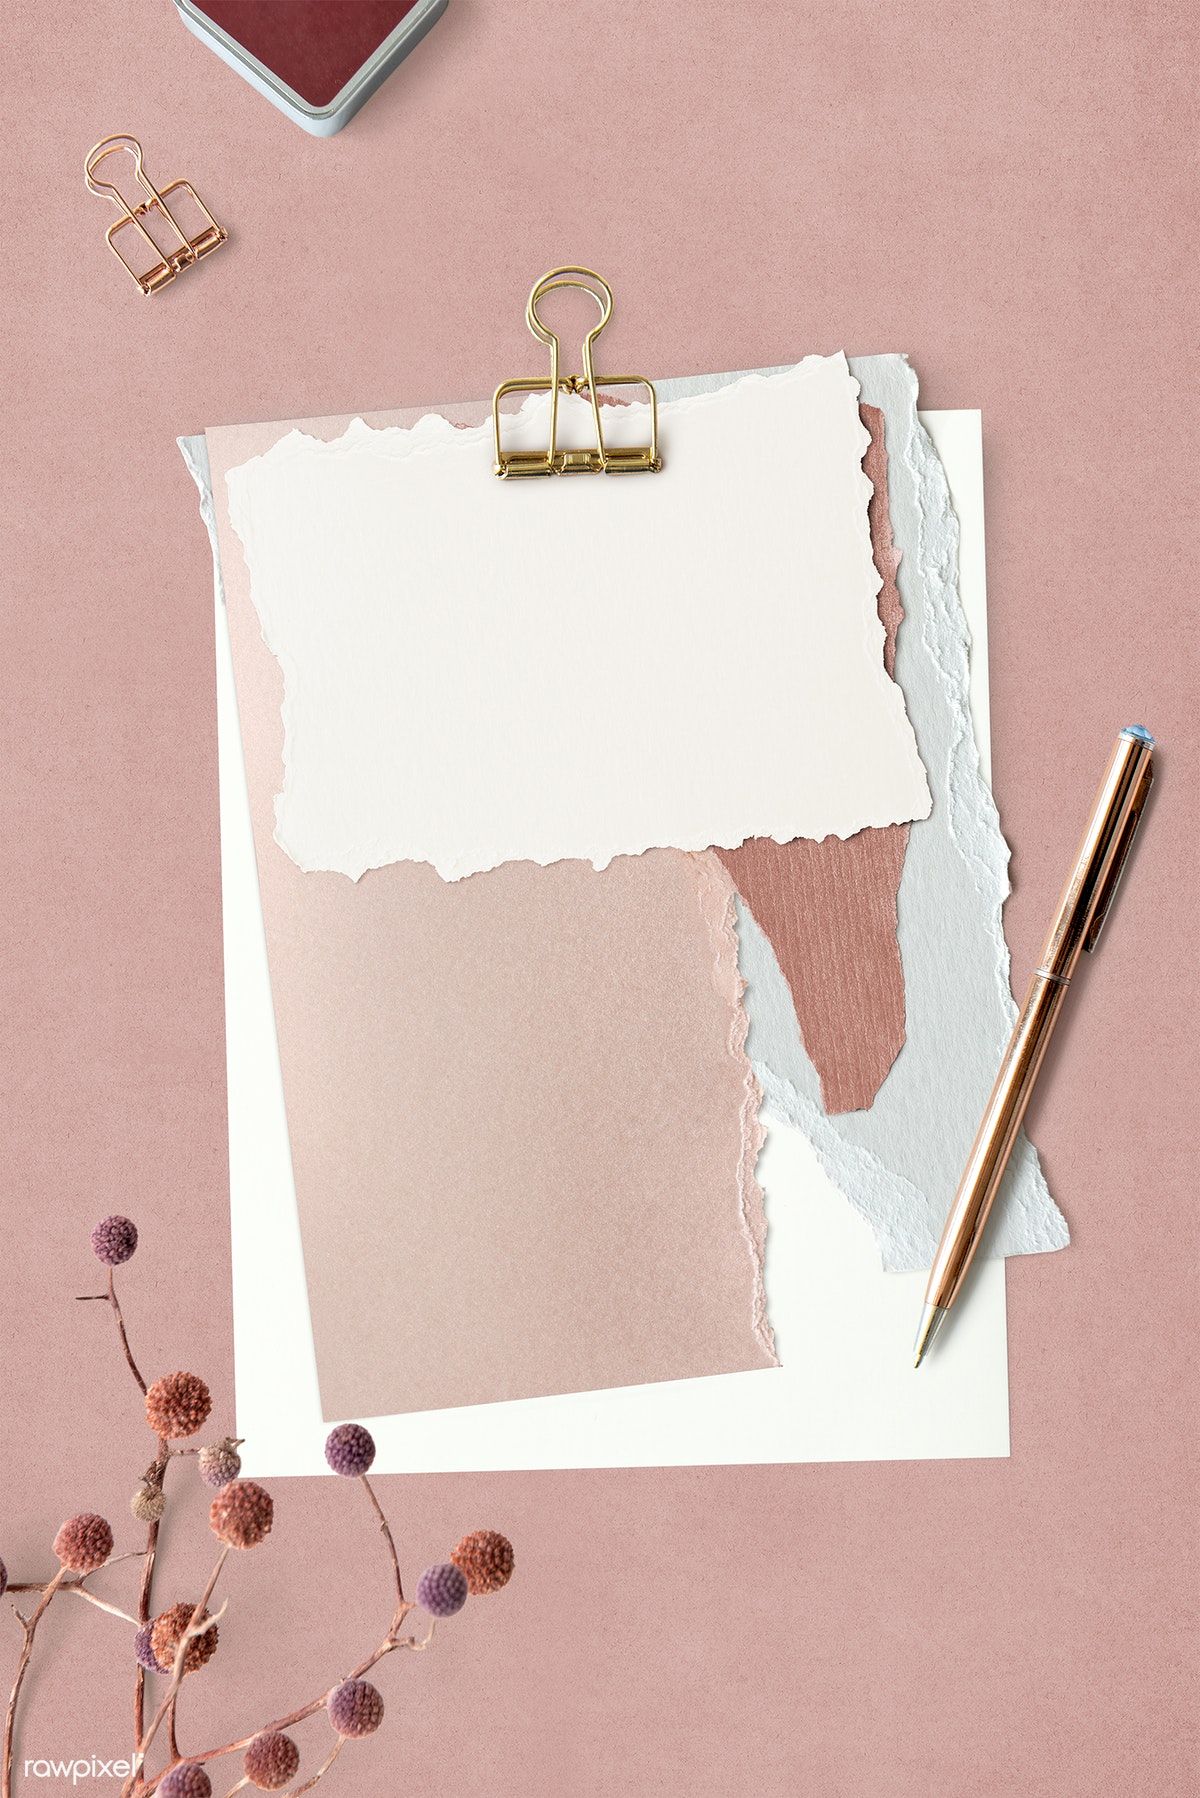 Download premium png of Blank torn pink paper with a